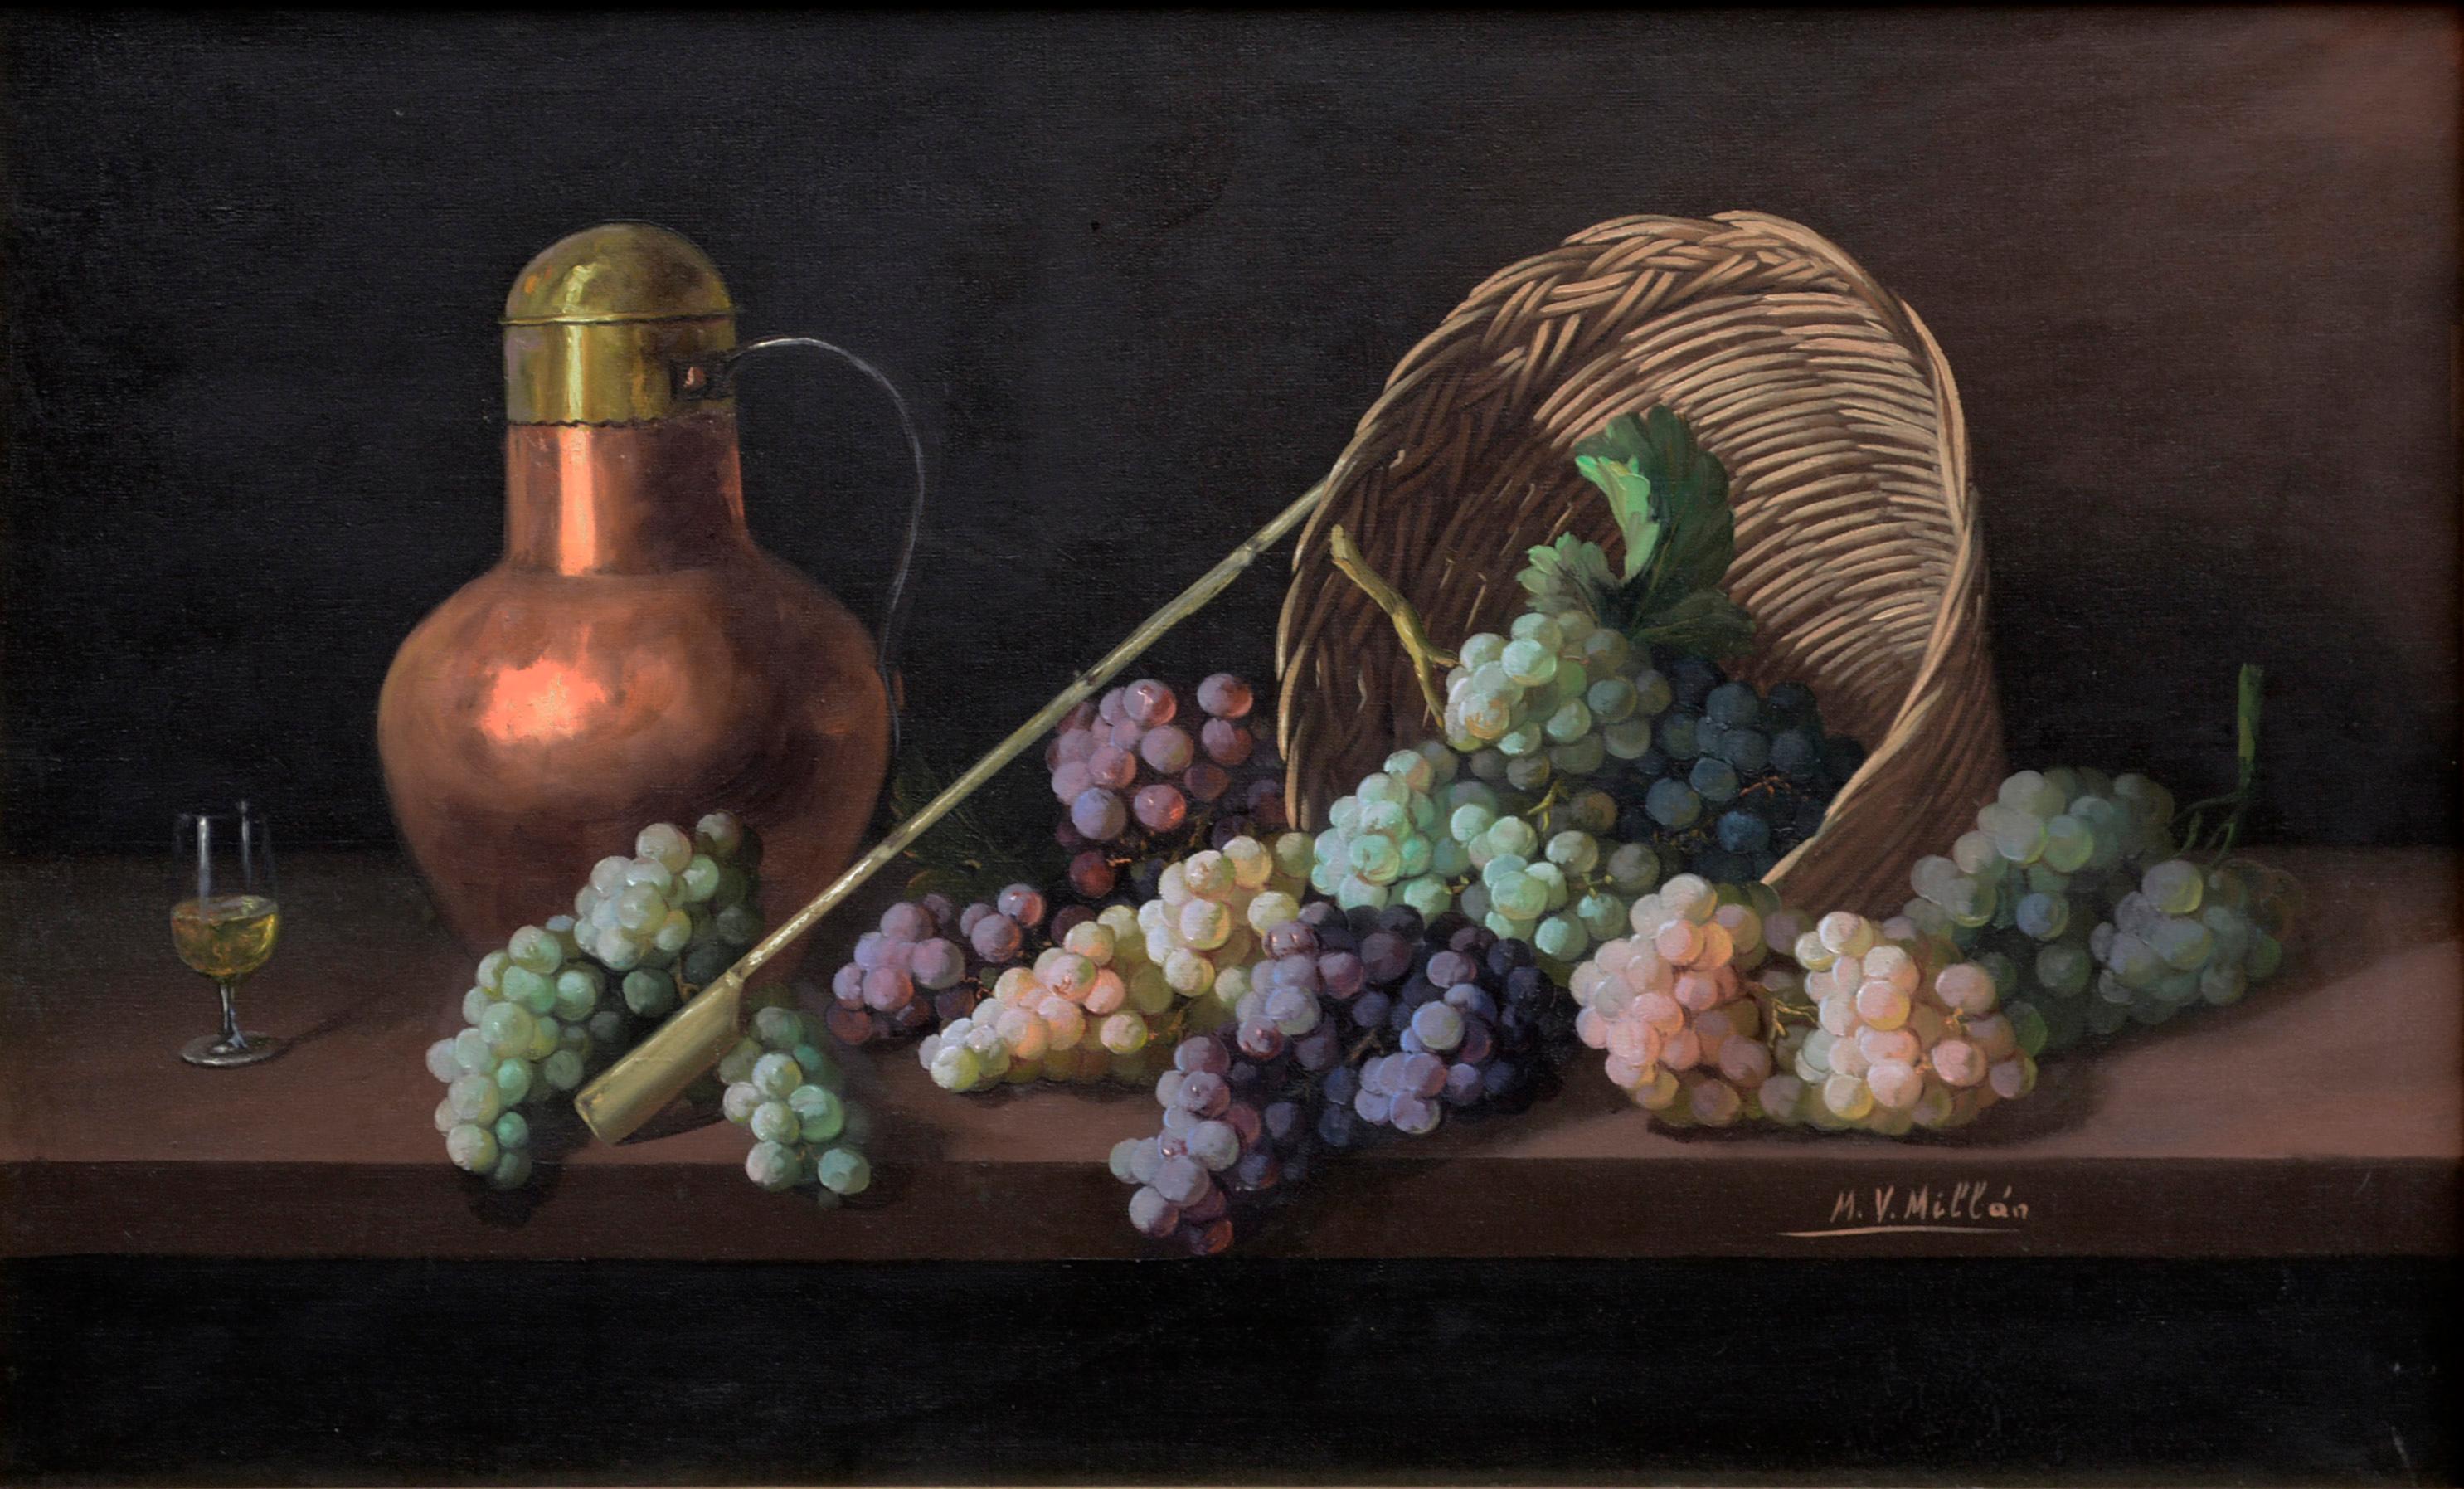 Manuel Ventura Millán - Mid Century Still-Life with Grapes, Copper Vessel  and Wine For Sale at 1stDibs